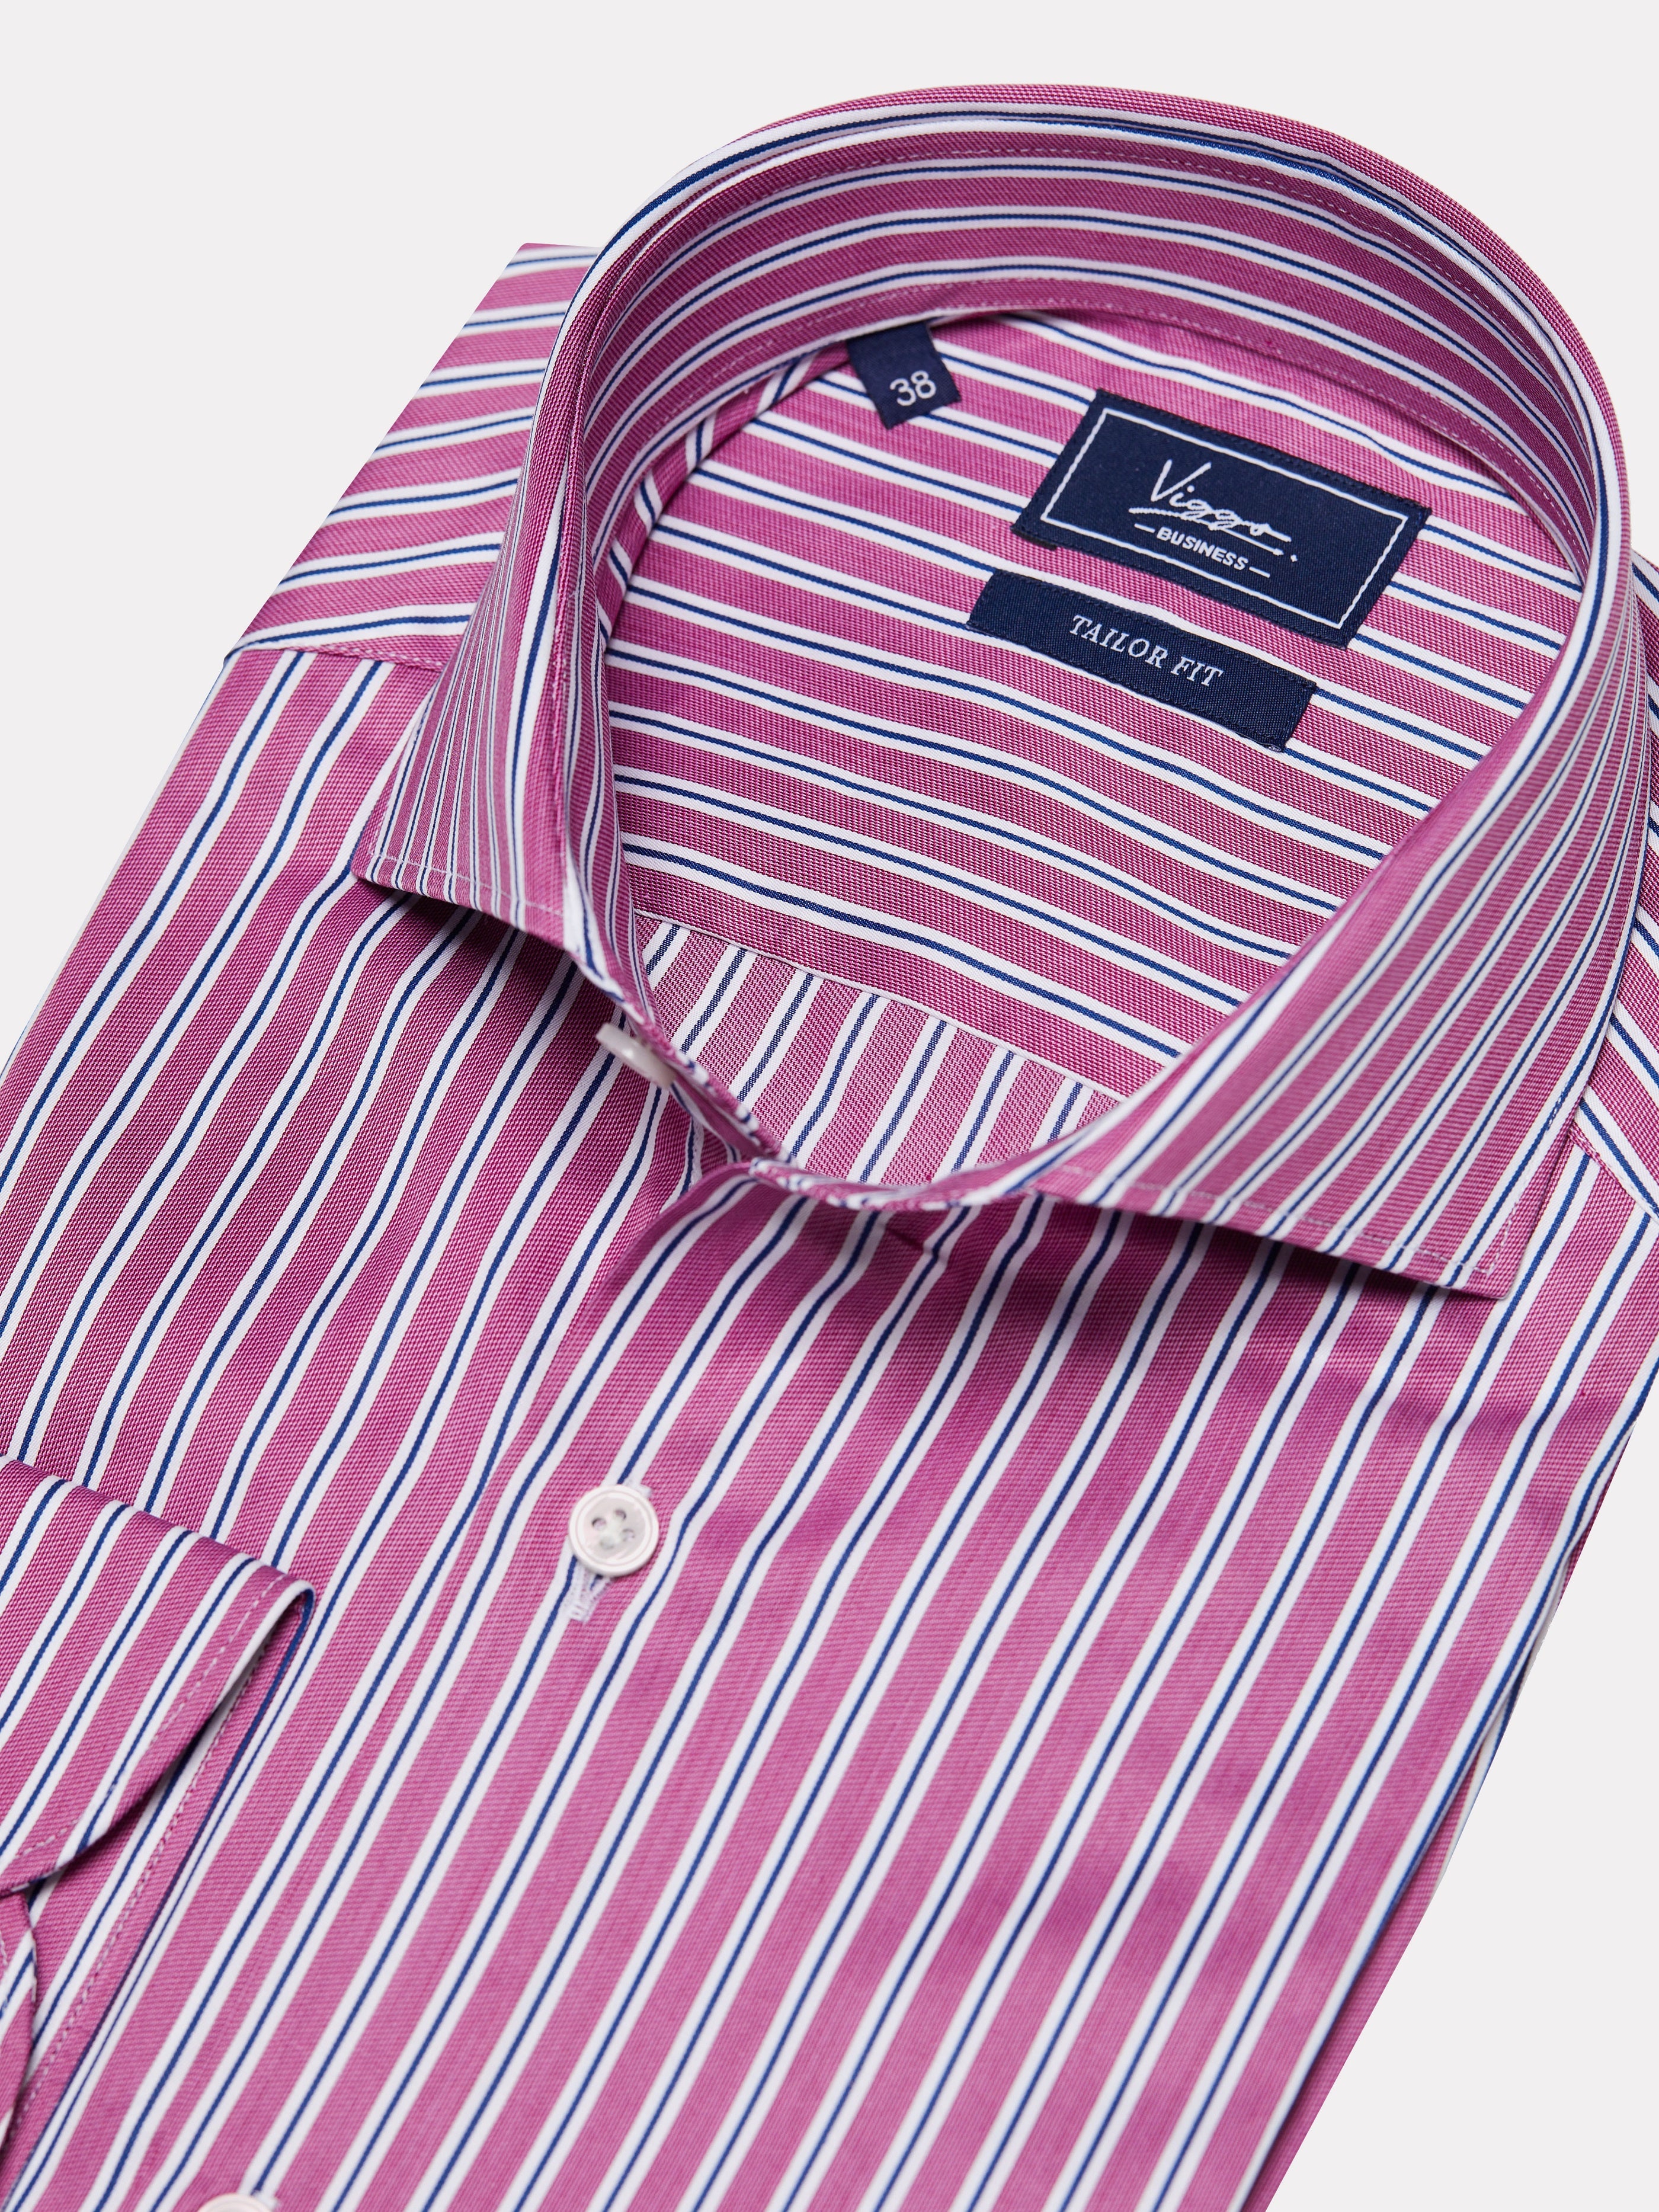 Pink shirt with white and navy stripes